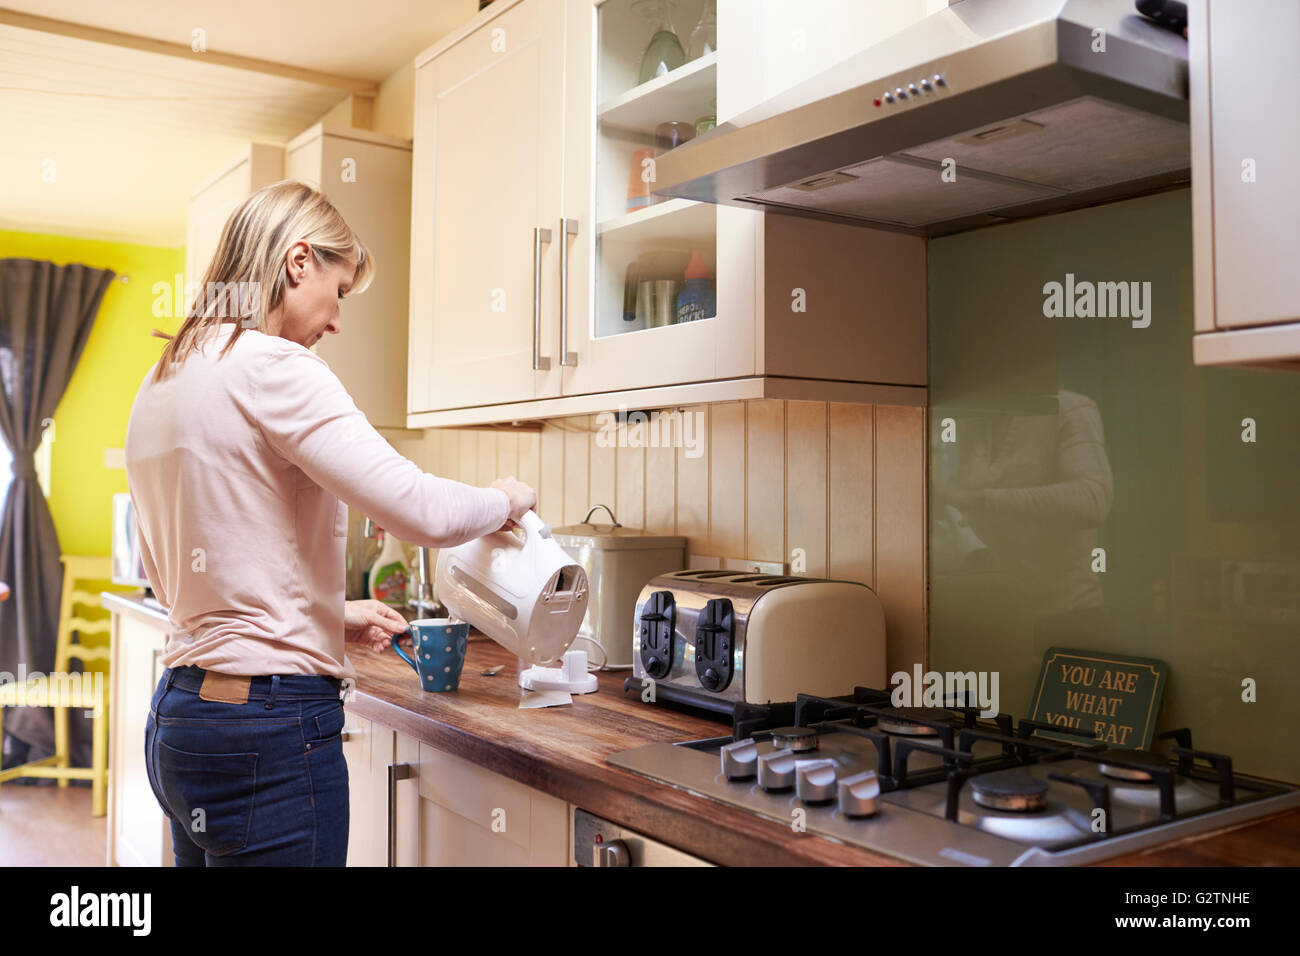 Woman Making Hot Drink In Kitchen Of Stylish Apartment Stock Photo